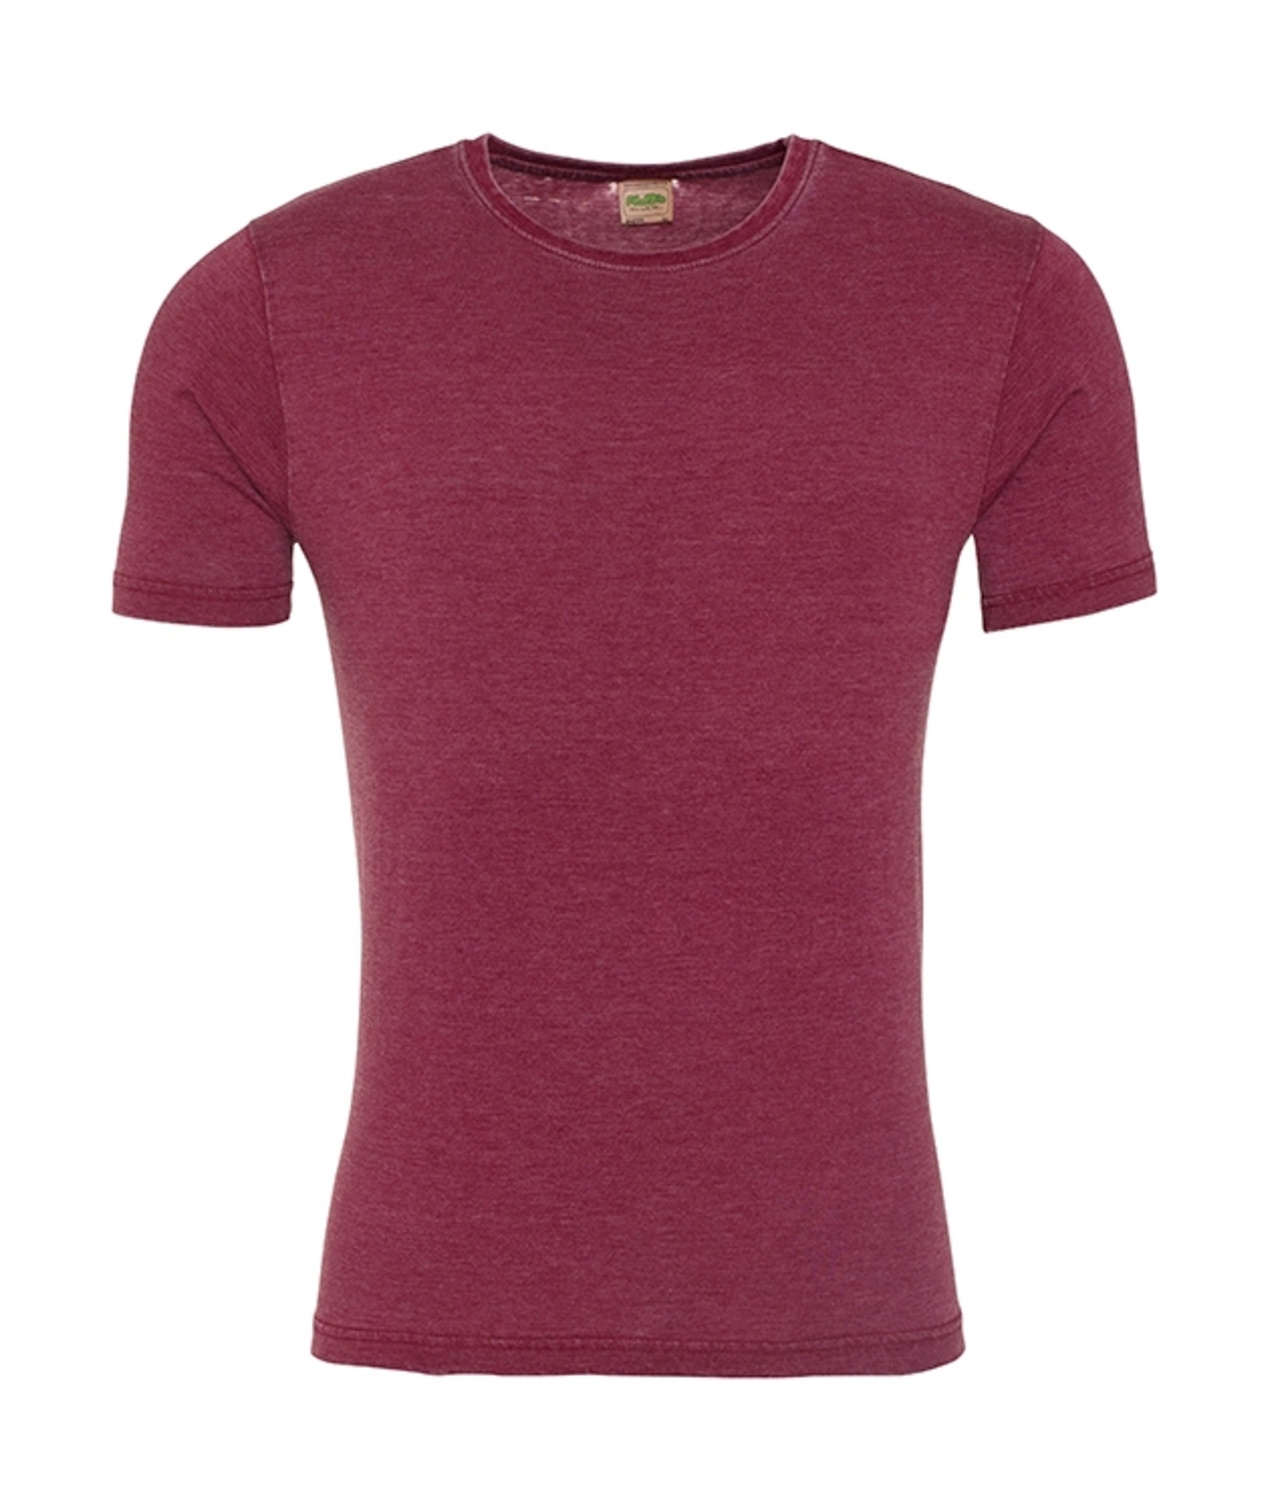 Just Ts Washed T - Burgundy - XS